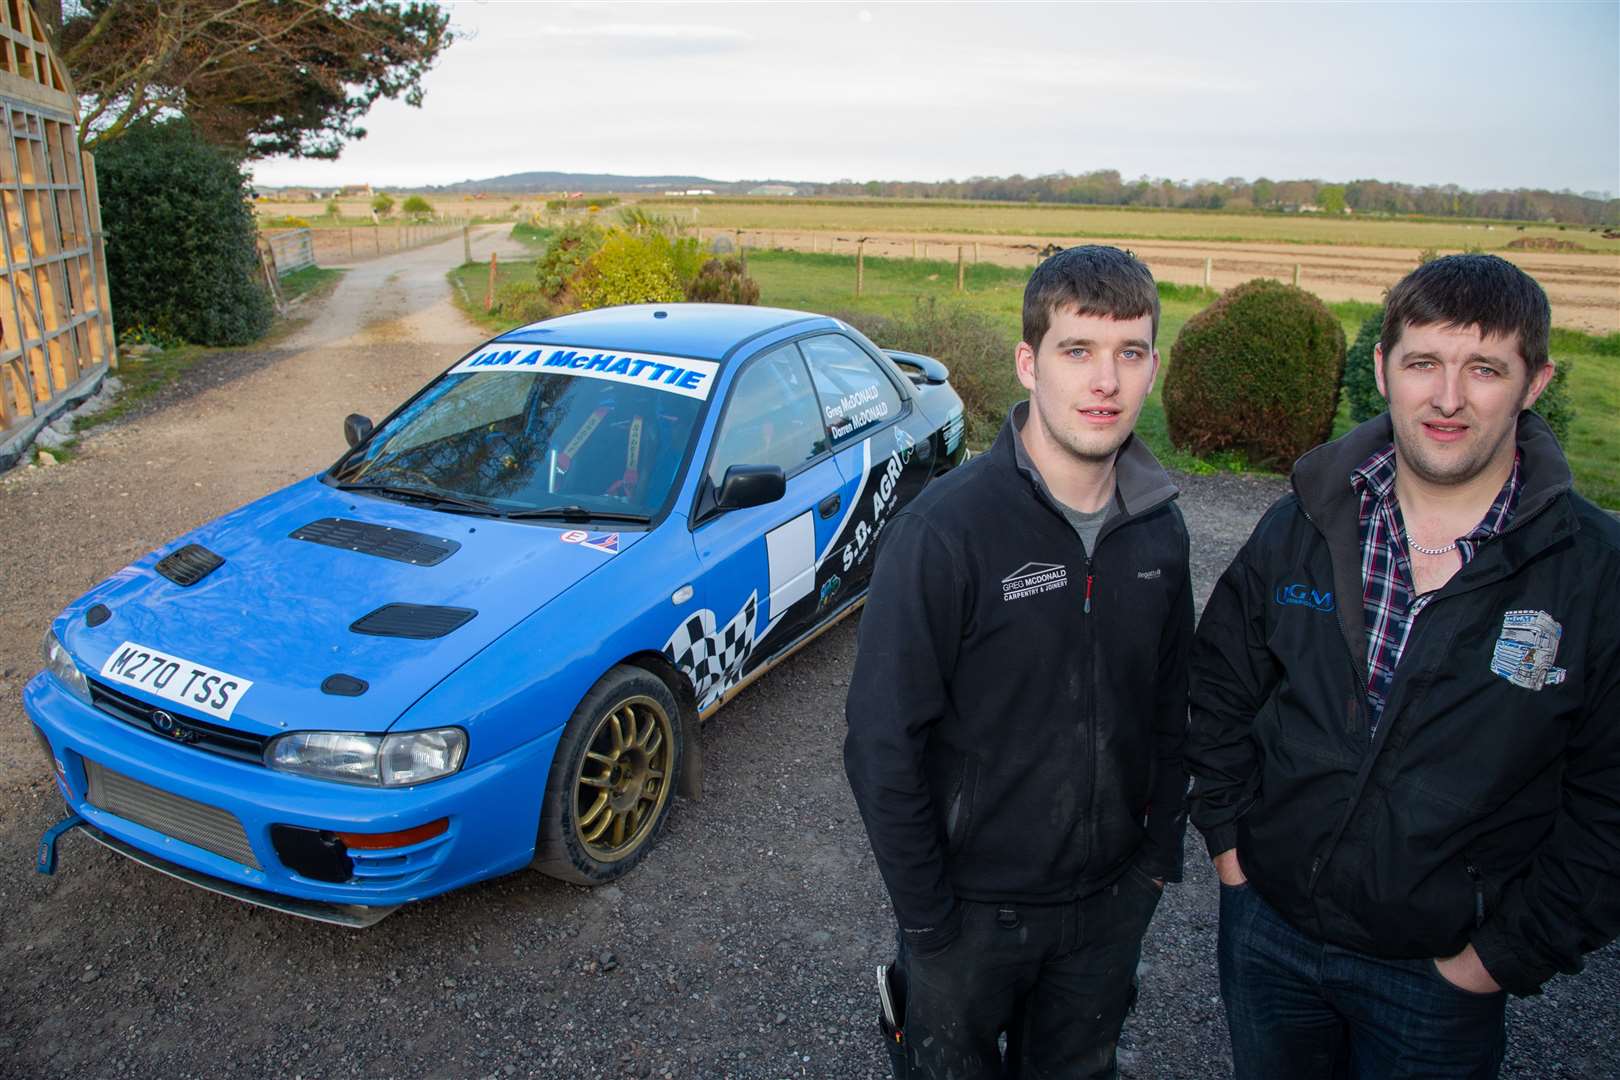 Darren McDonald (Right) is gearing up for his first Speyside Stages rally as a driver. He will be co-driven by his brother Greg McDonald (Left) in their Subaru Impreza...Picture: Daniel Forsyth. Image No.043749.